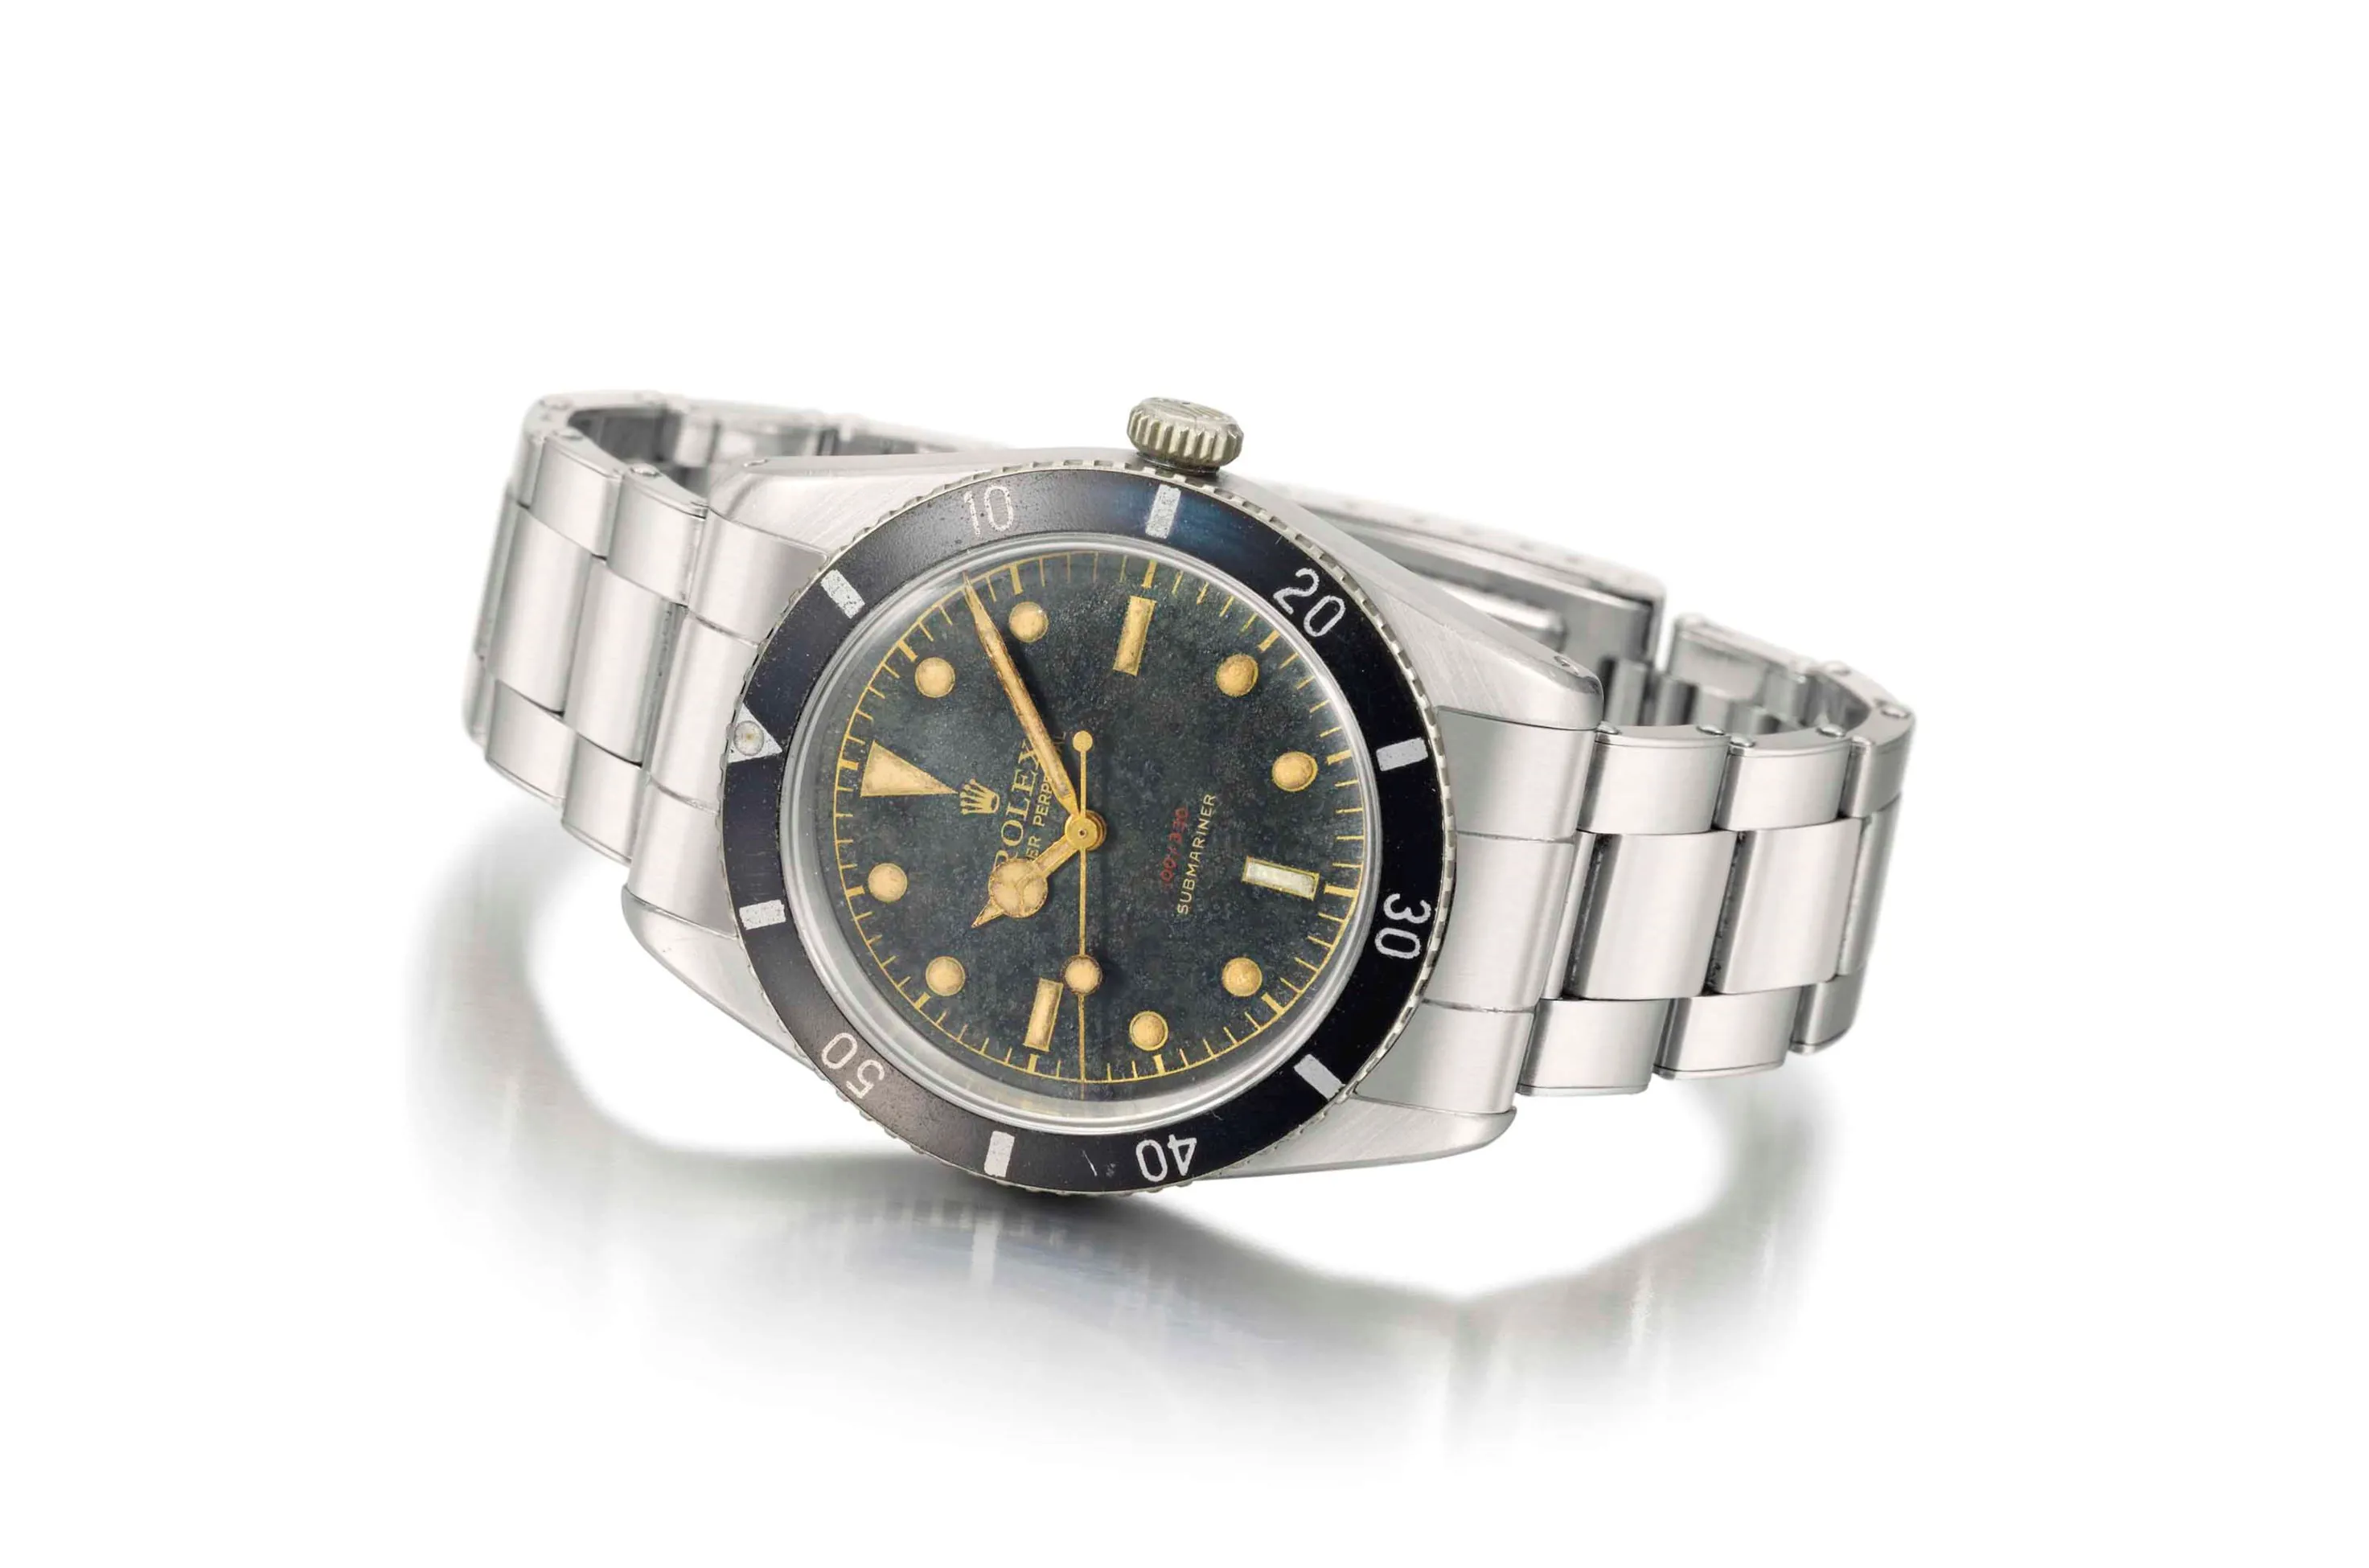 Rolex Submariner 6536/6538 37mm Stainless steel Black lacquer